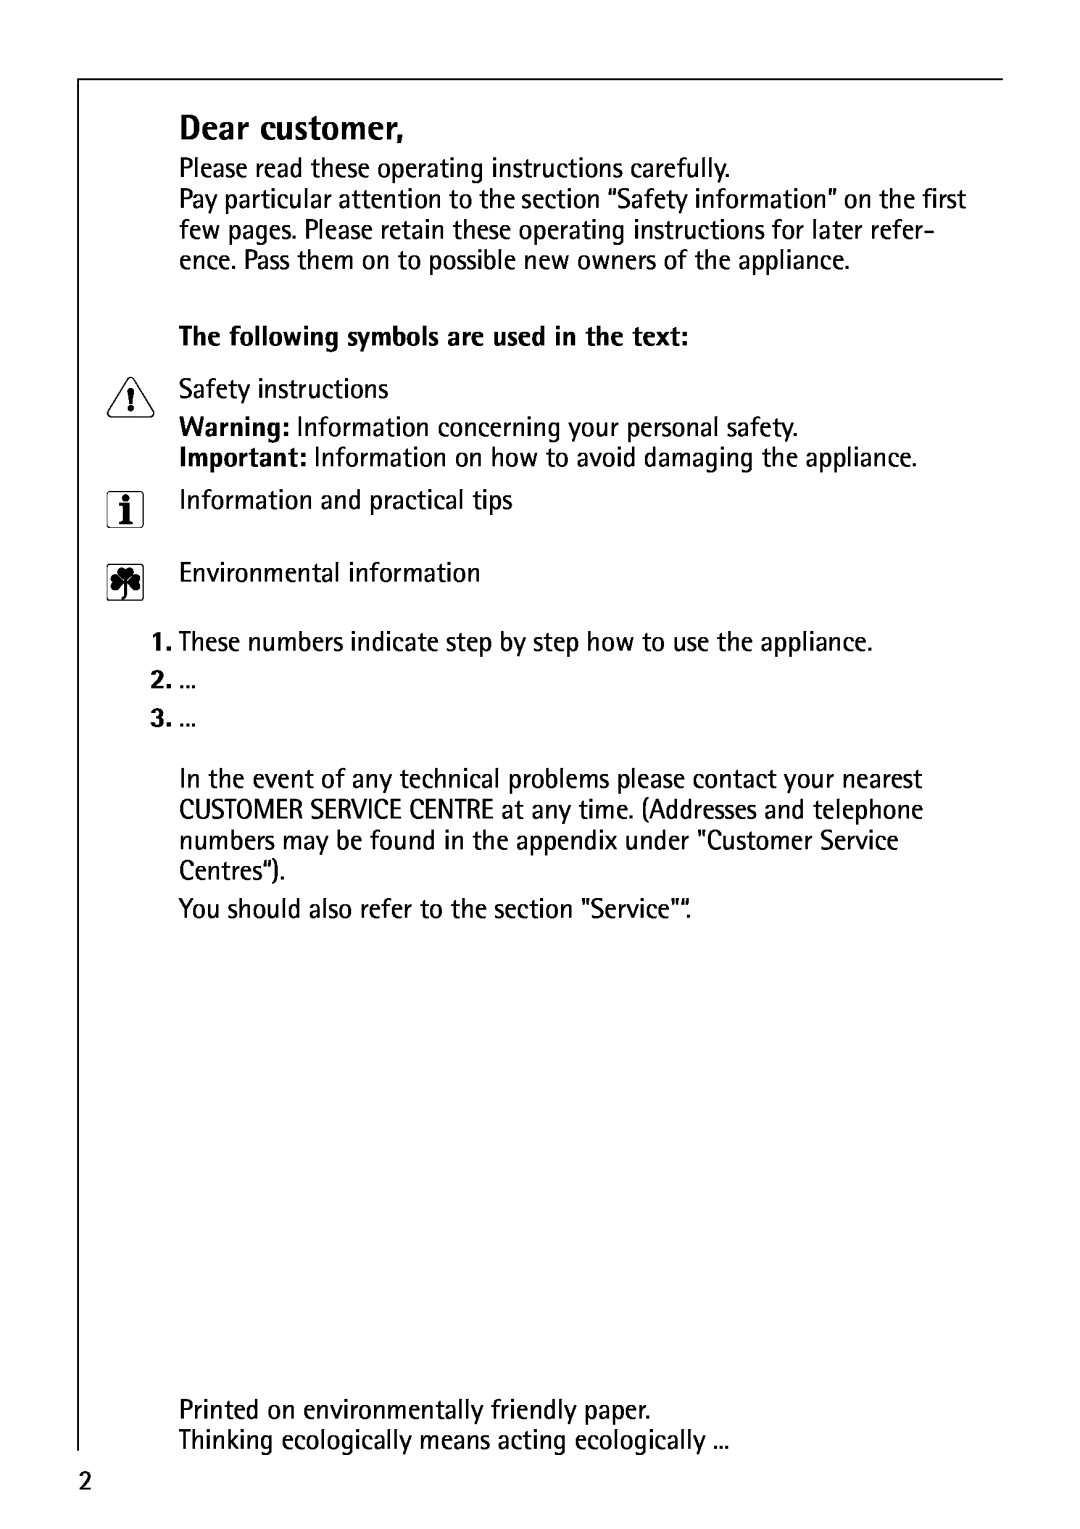 AEG B4130-1 operating instructions The following symbols are used in the text 